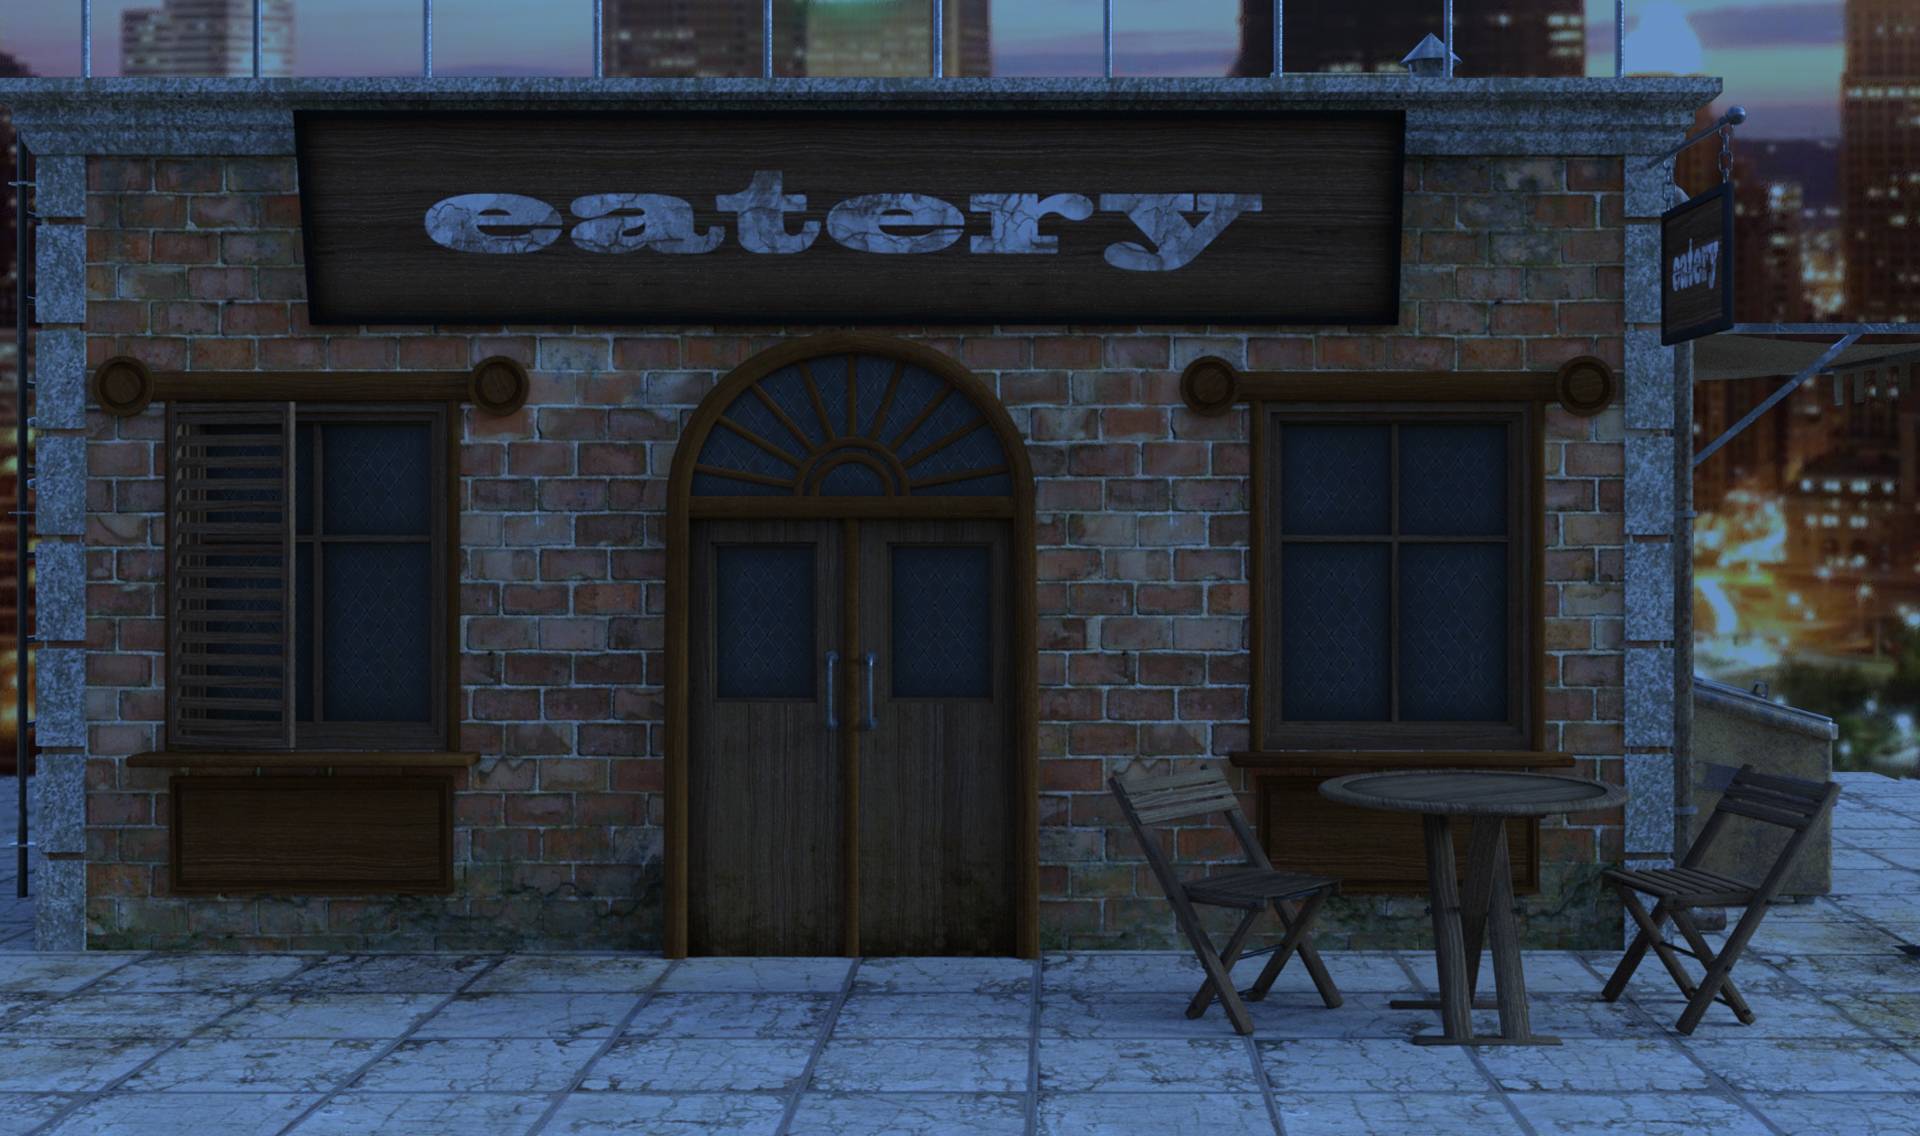 EXT. EATERY – NIGHT